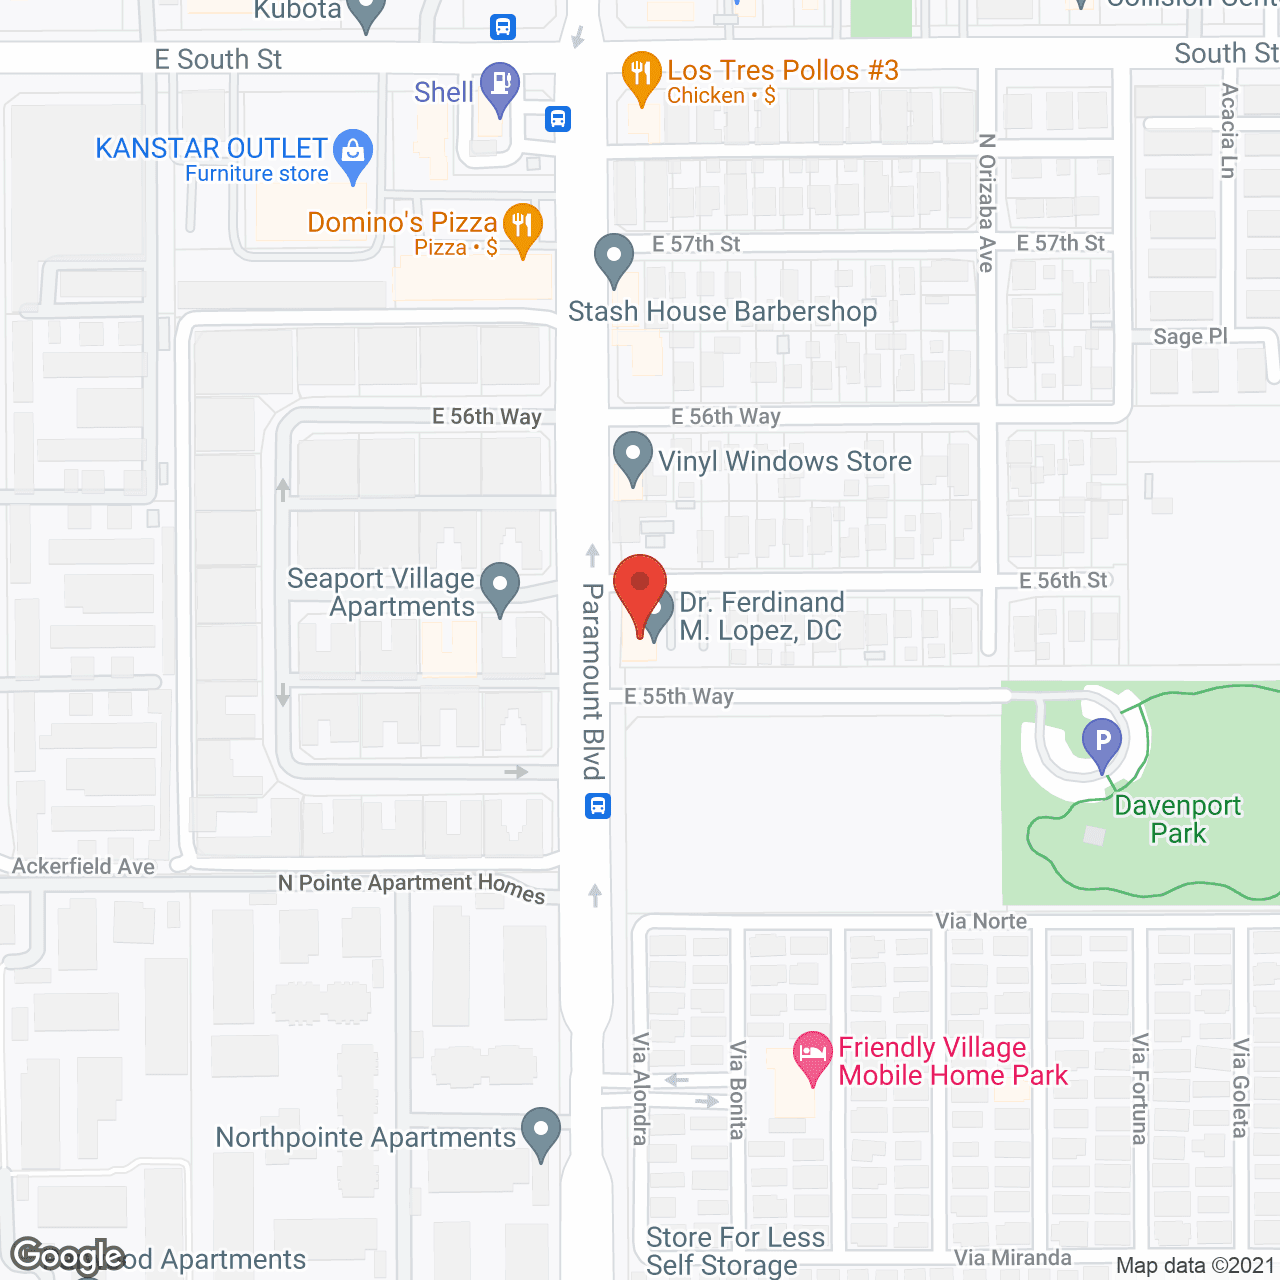 Foremost Pharmacy in google map